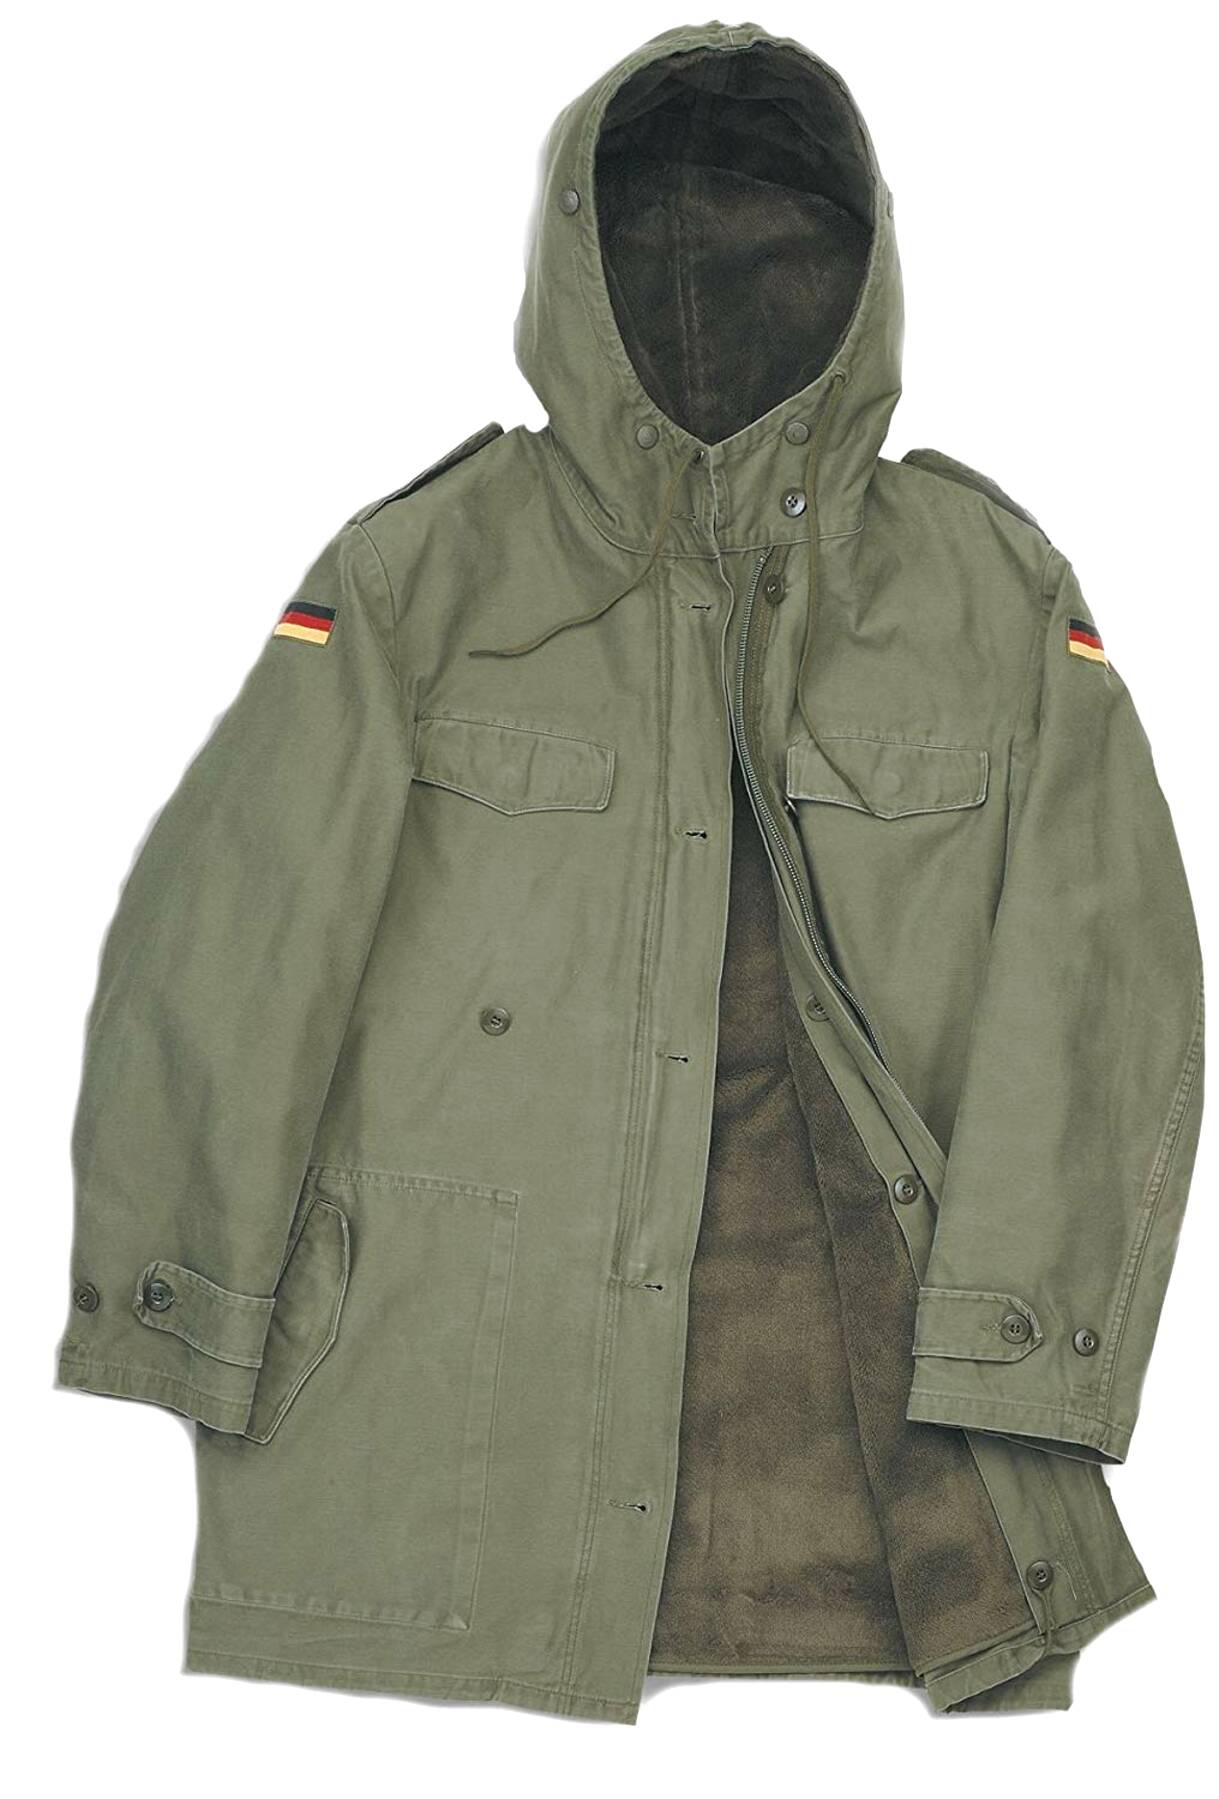 German Army Jacket for sale in UK | 66 used German Army Jackets